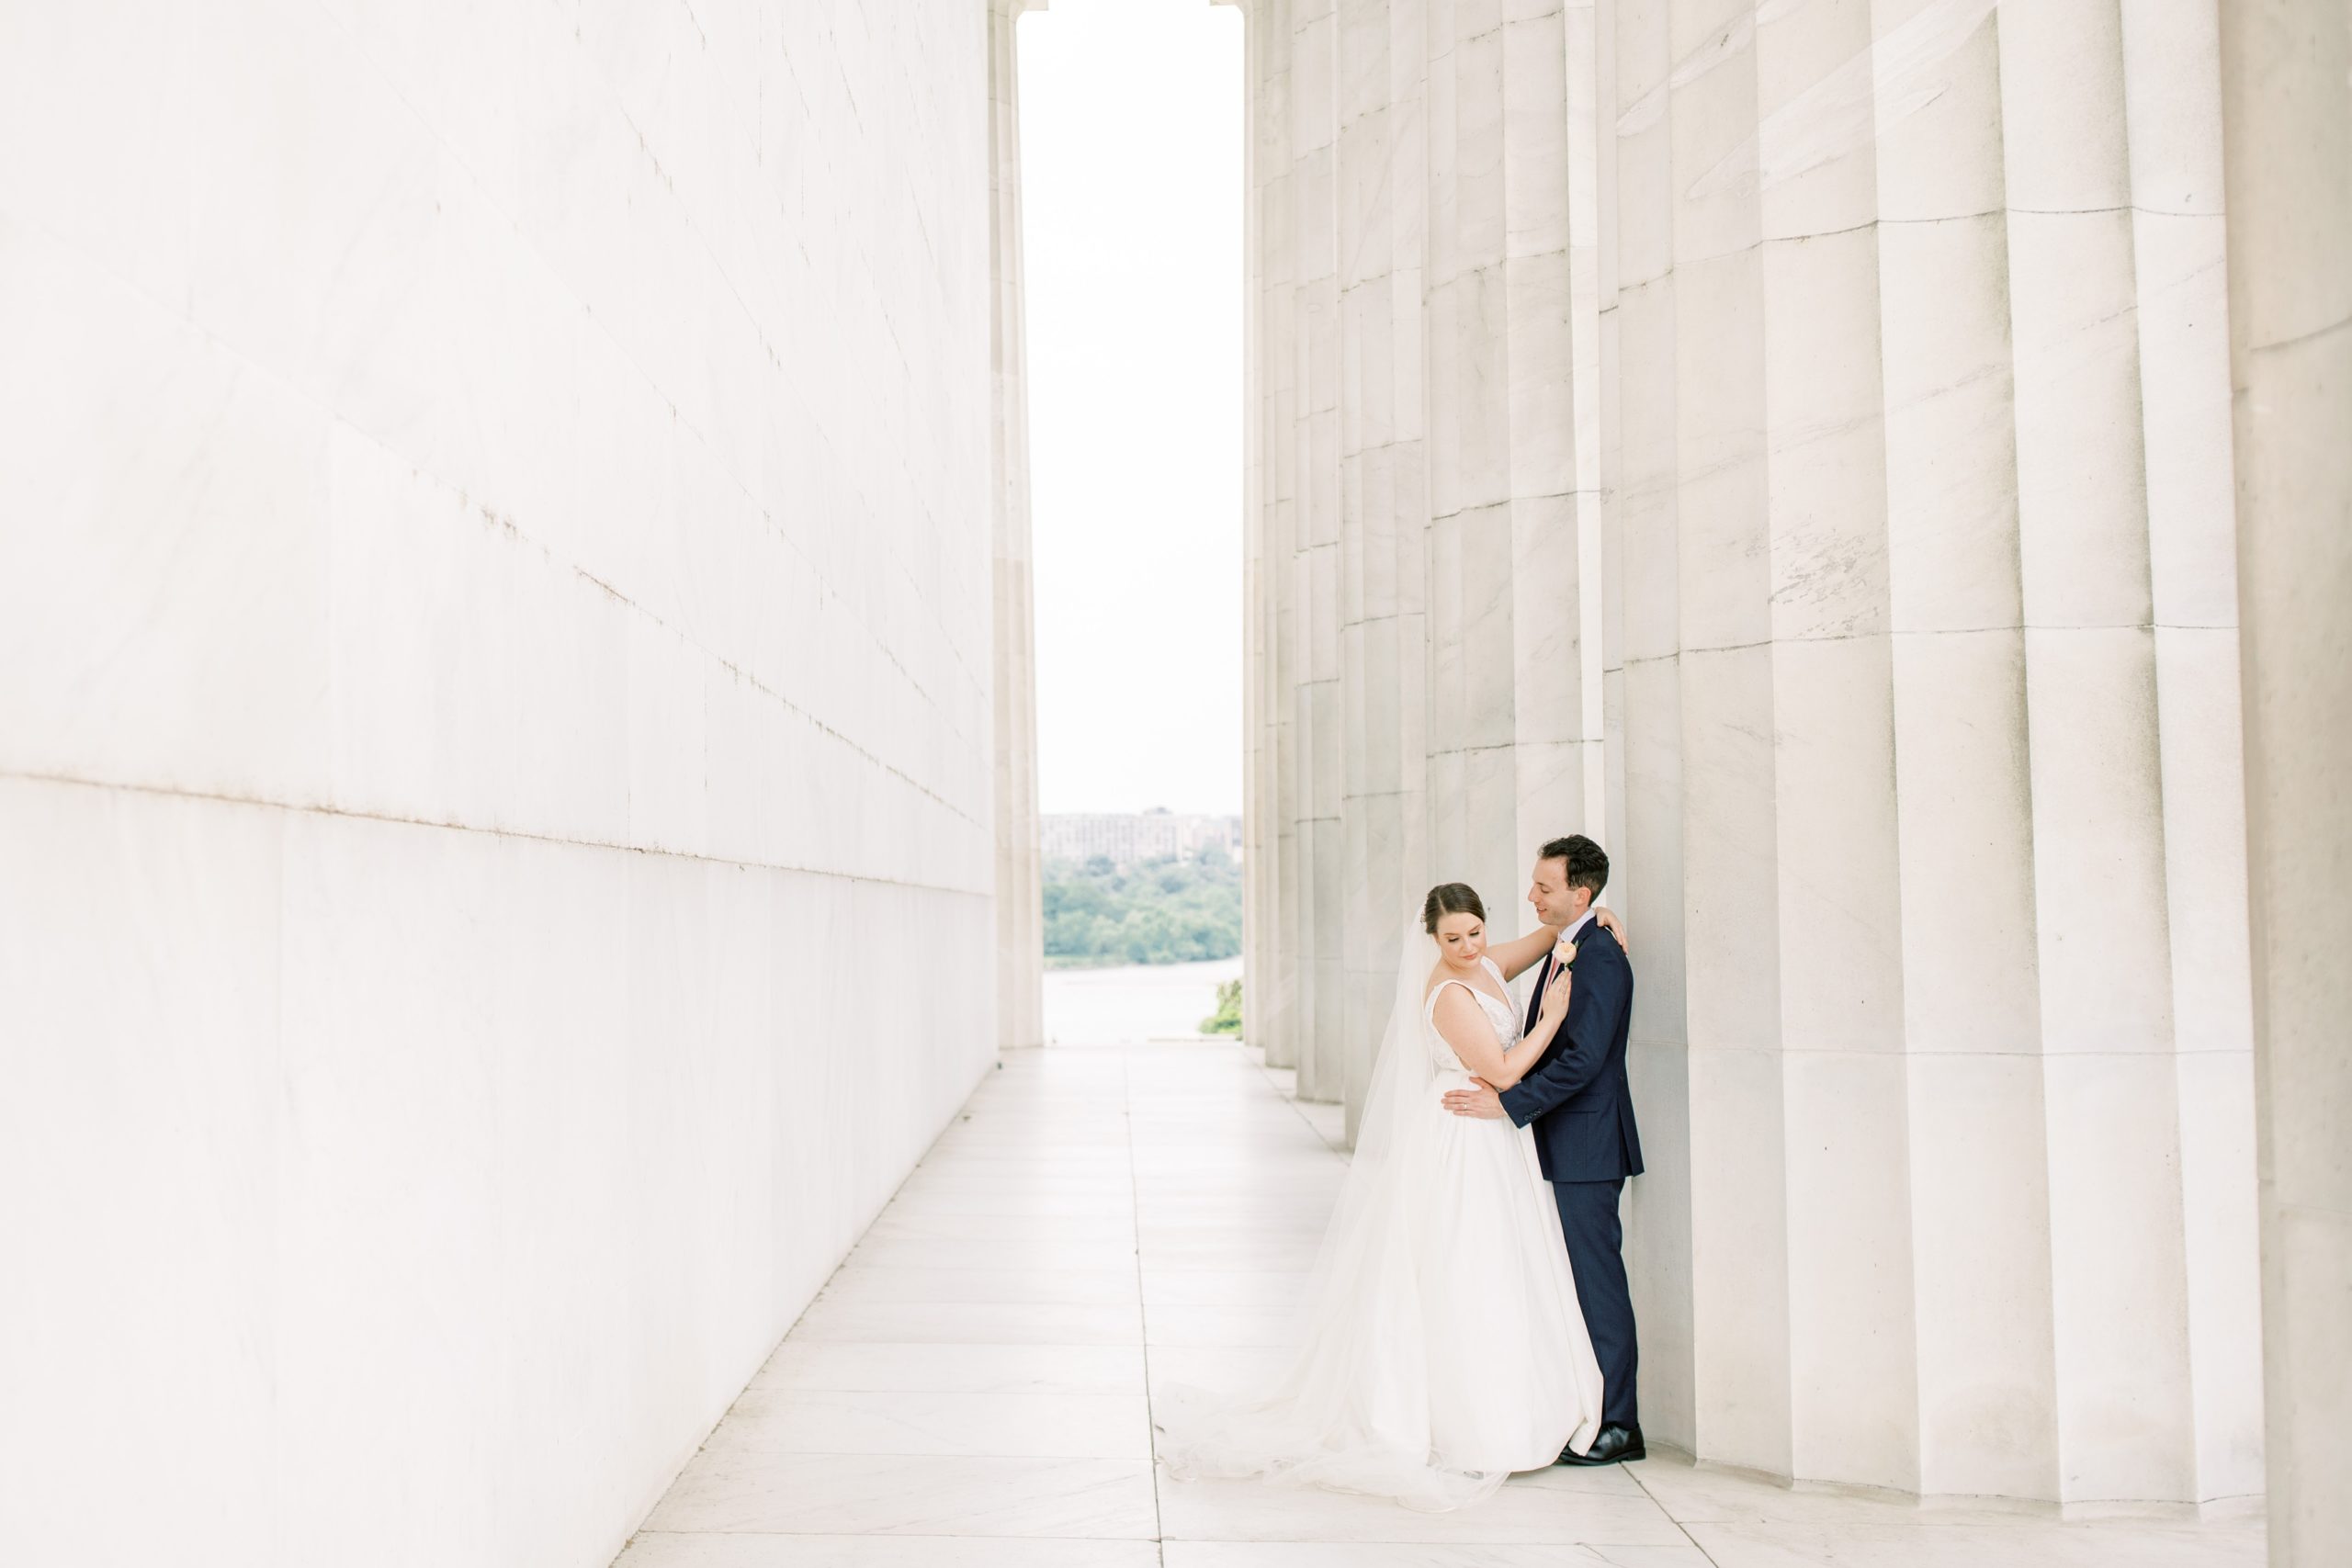 An intimate spring wedding elopement at the War Memorial in Washington, DC photographed by Alicia Lacey and planned by SRS Events.